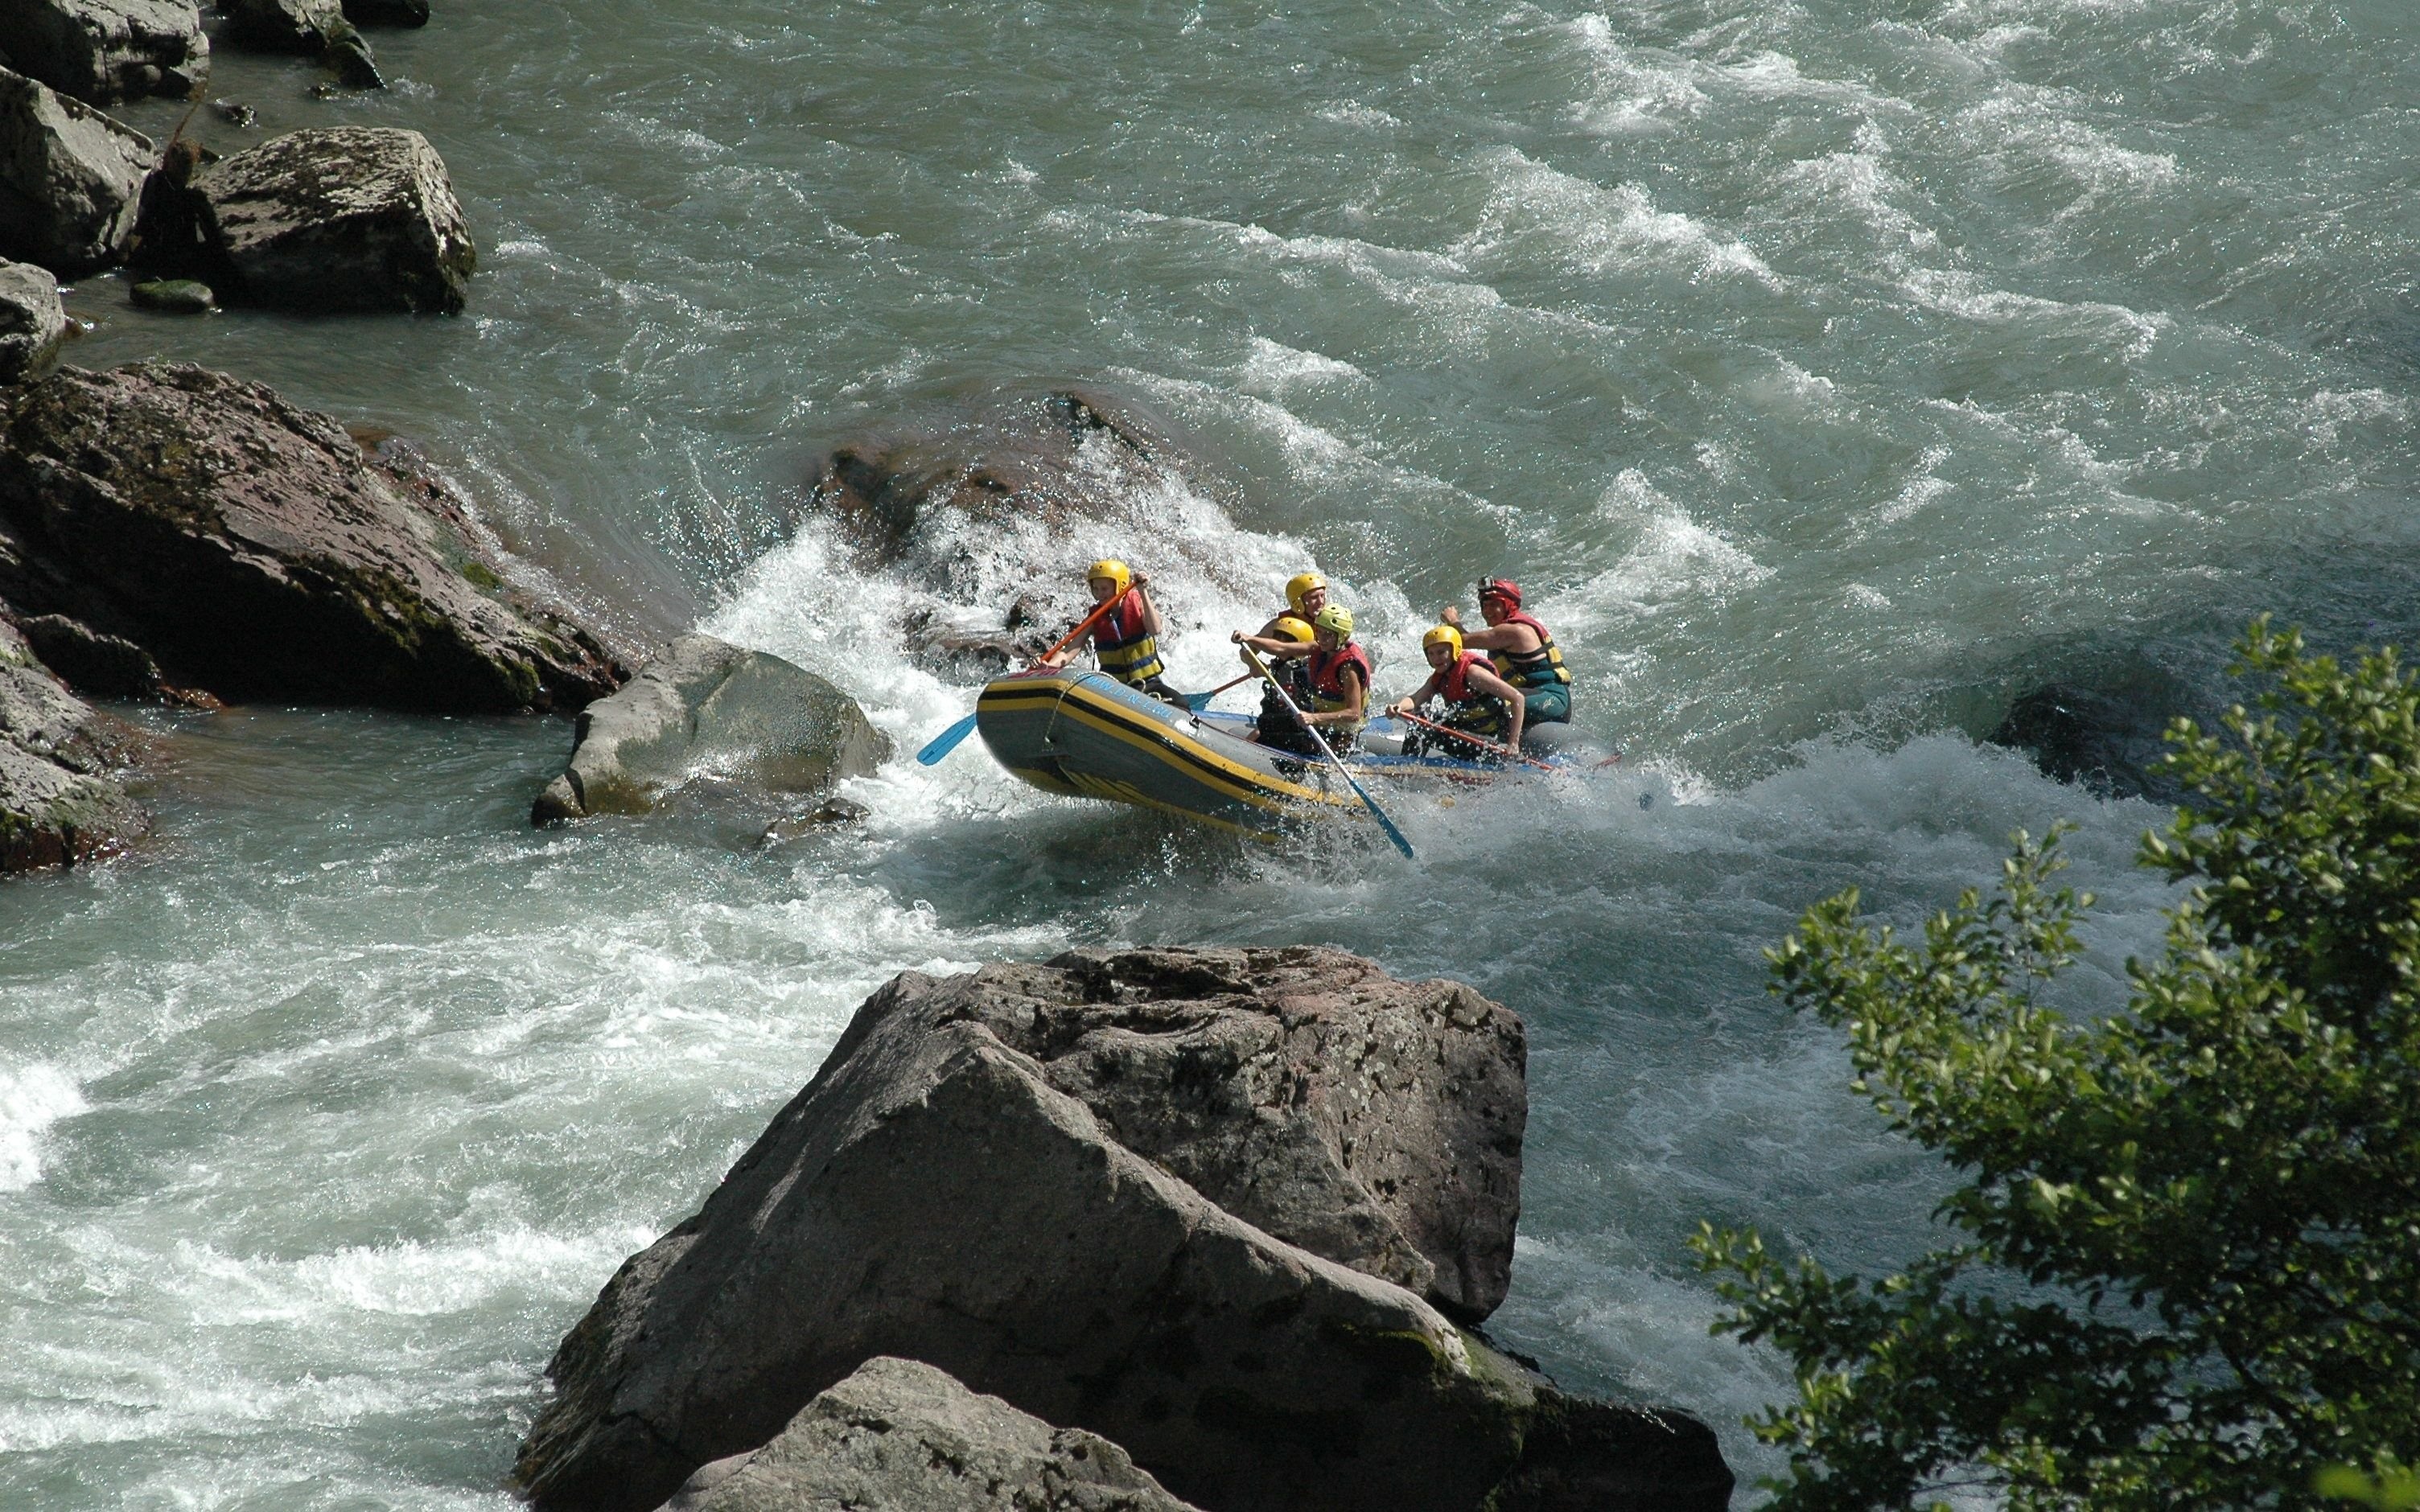 Rafting: Class 3-4 whitewater difficulty, Medium waves, rocks and a considerable drop. 3010x1880 HD Background.